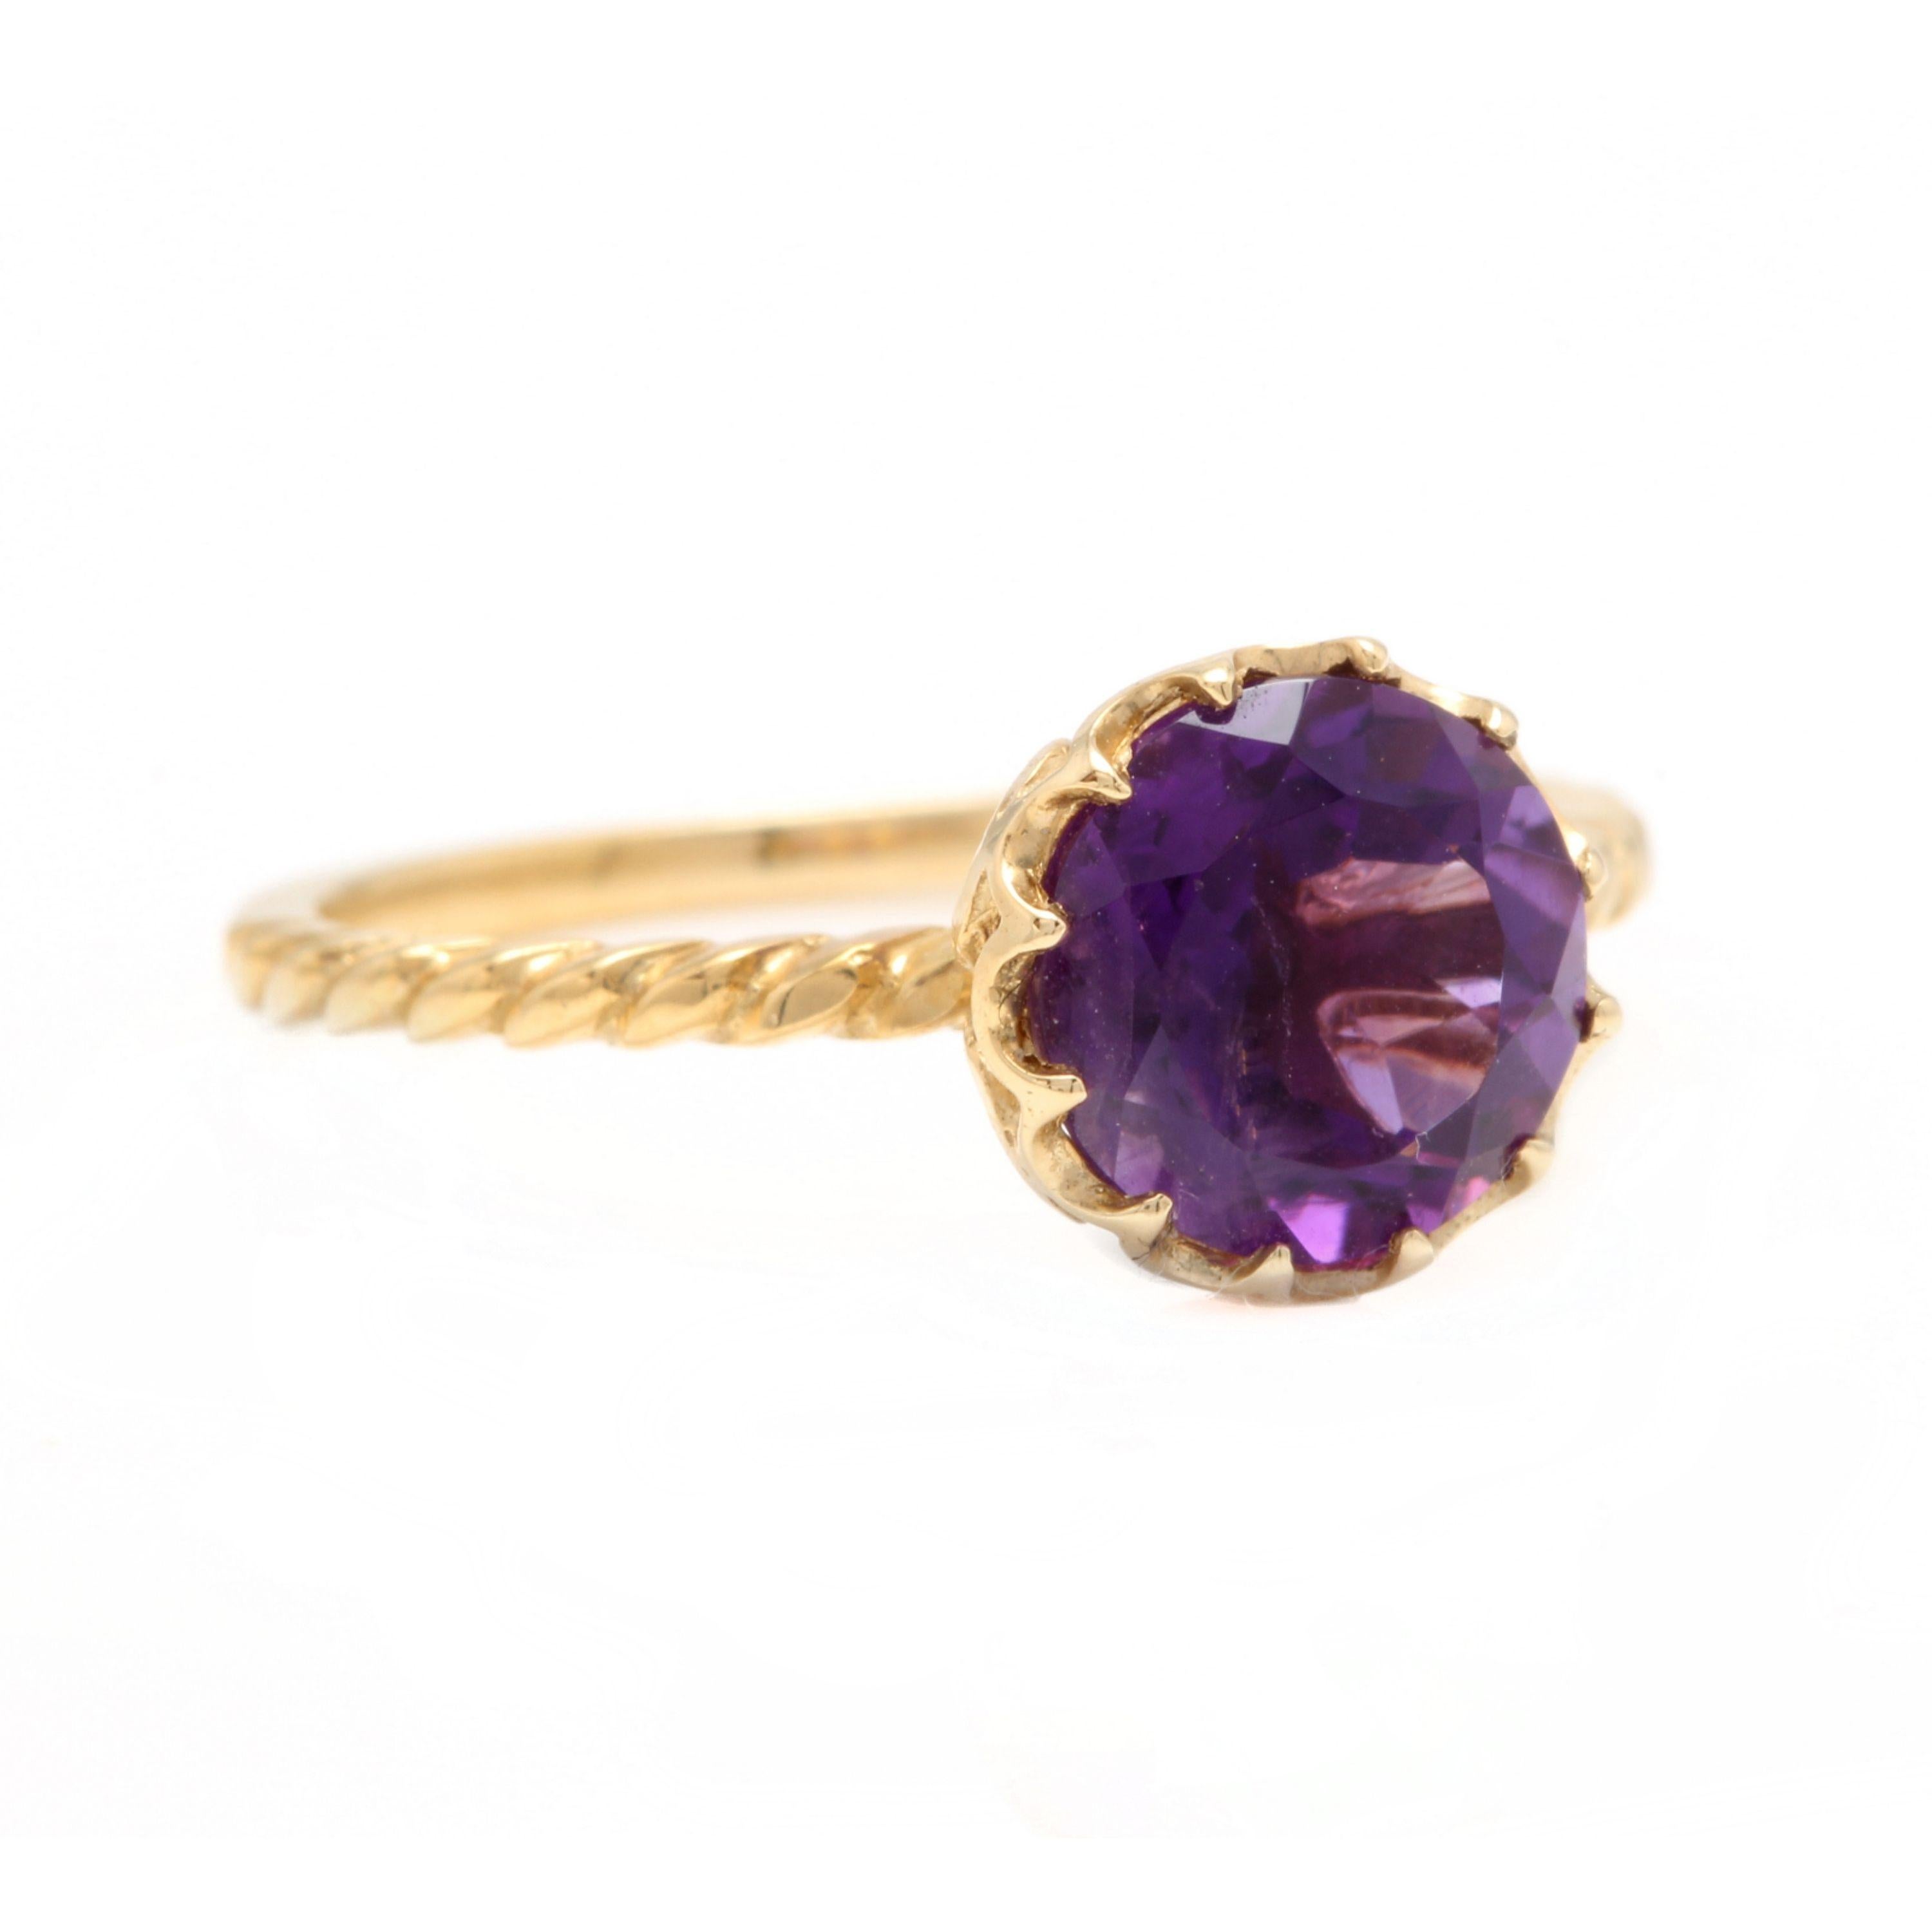 2.00 Carats Exquisite Natural Amethyst 14K Solid Yellow Gold Ring

Stamped: 14K

Total Natural Amethyst Weight is: Approx. 2.00 Carats

Amethyst Measures: Approx. 8.00mm

Ring total weight: Approx. 2.0 grams

Ring size 7 ( We offer free resizing